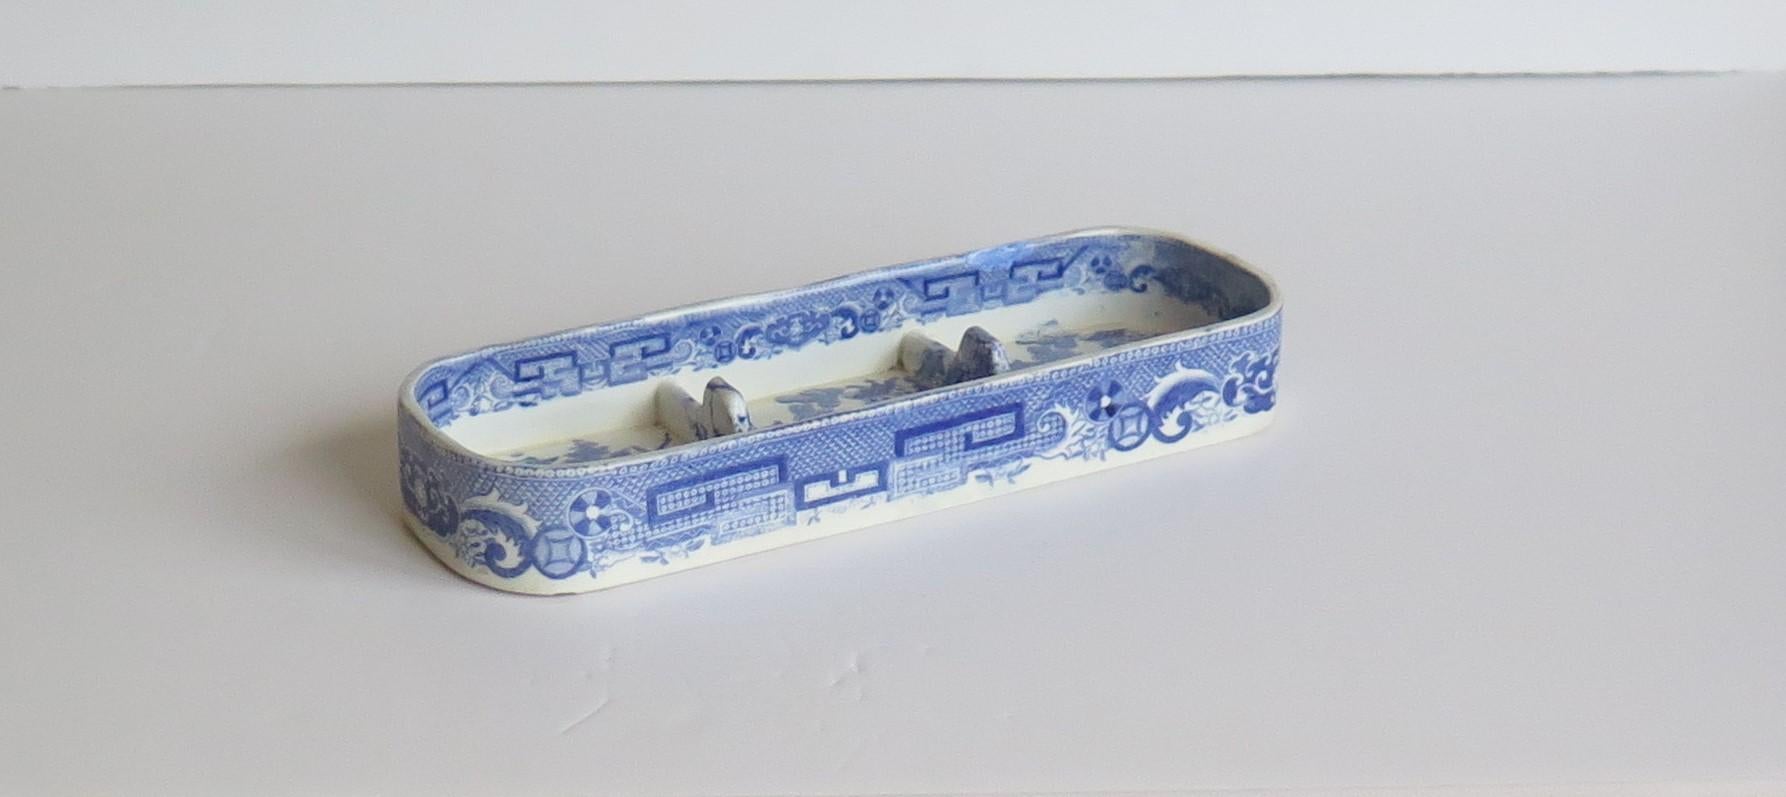 Chinoiserie Rare Early Spode Pen Tray Pearlware Blue and White Willow Pattern, circa 1800